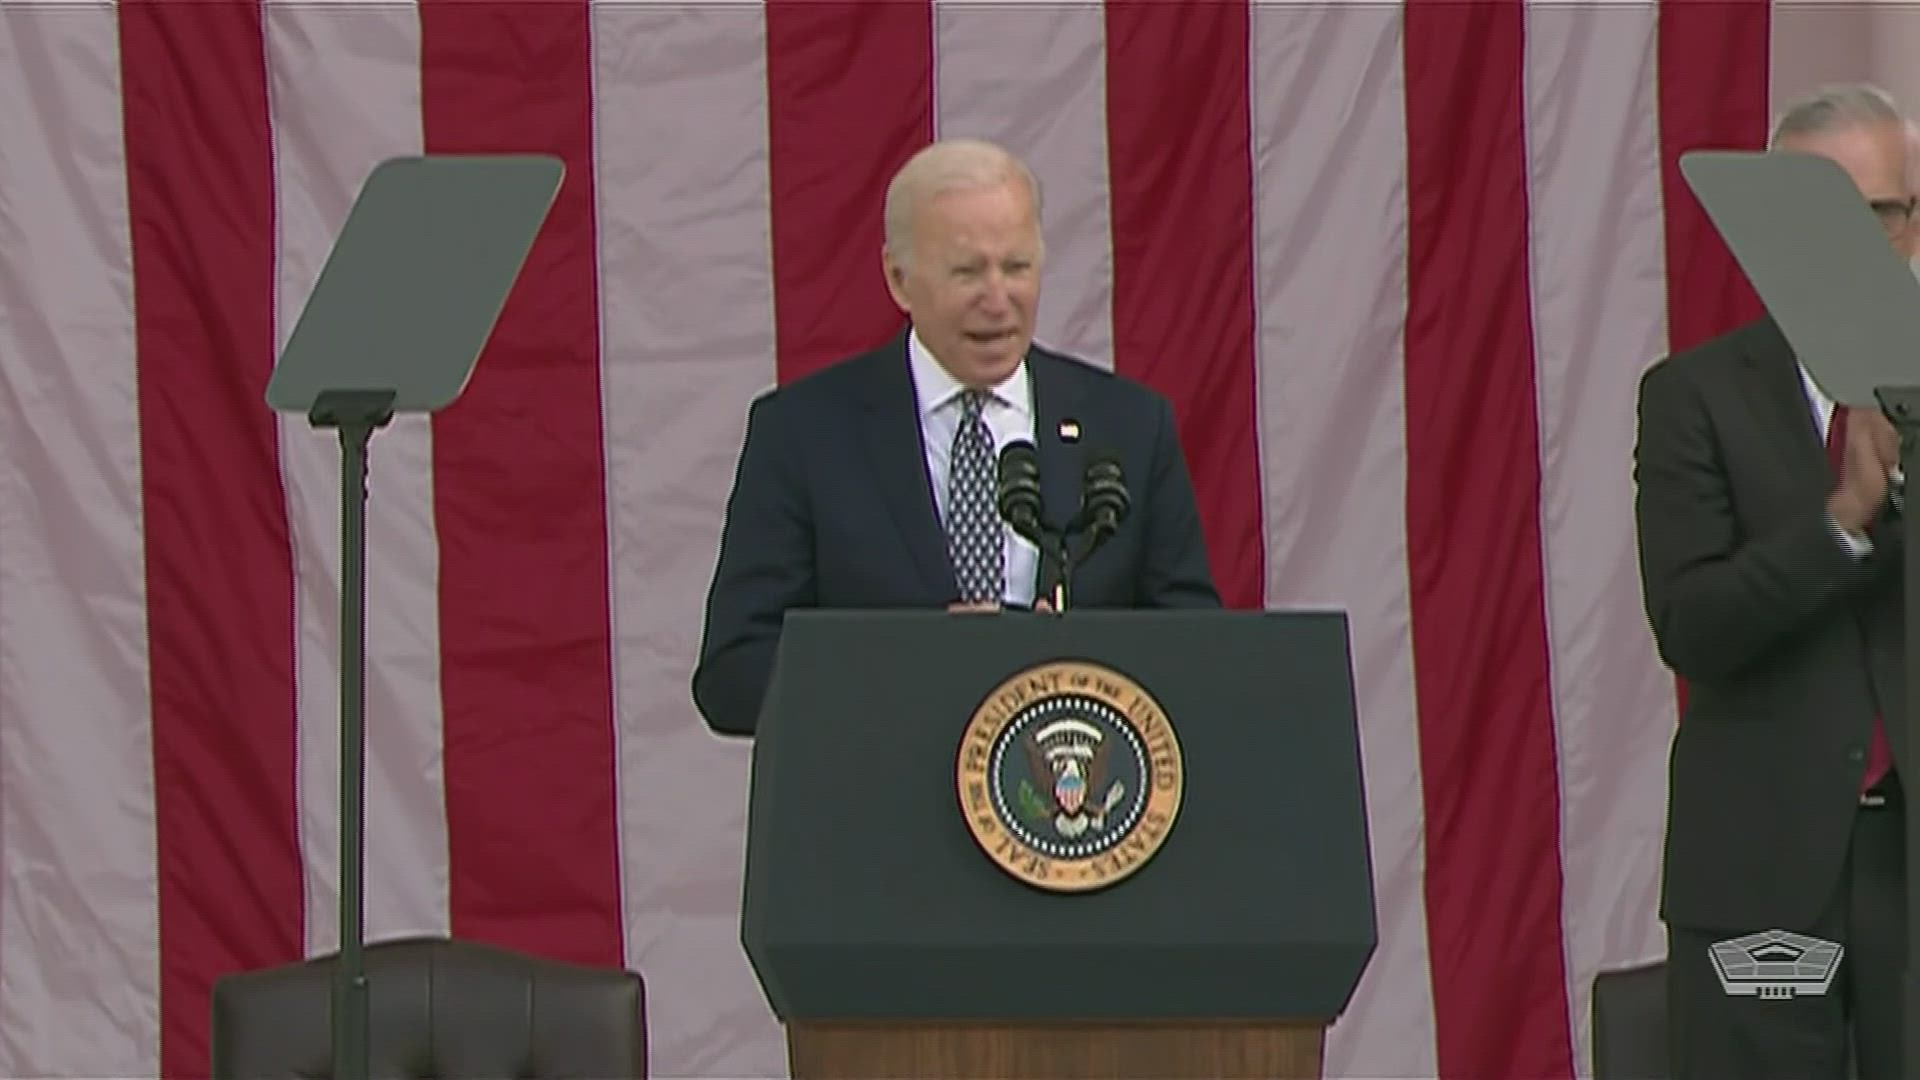 President Joe Biden gives remarks honoring veterans at Arlington National Cemetery. Secretary of Defense Lloyd J. Austin III and Army Gen. Mark A. Milley, chairman of the Joint Chiefs of Staff, are in attendance.
 
